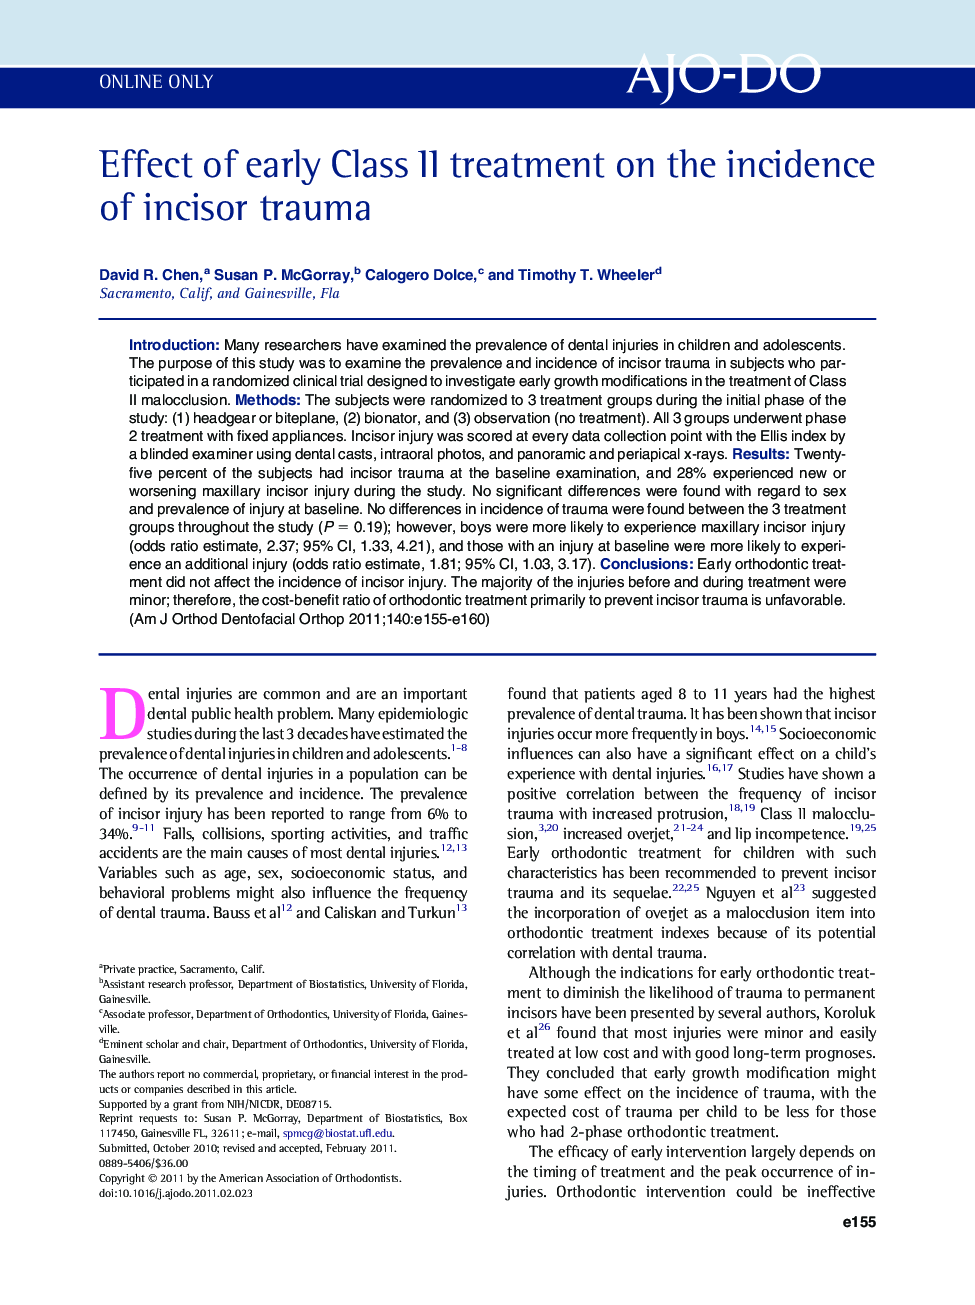 Effect of early Class II treatment on the incidence of incisor trauma 